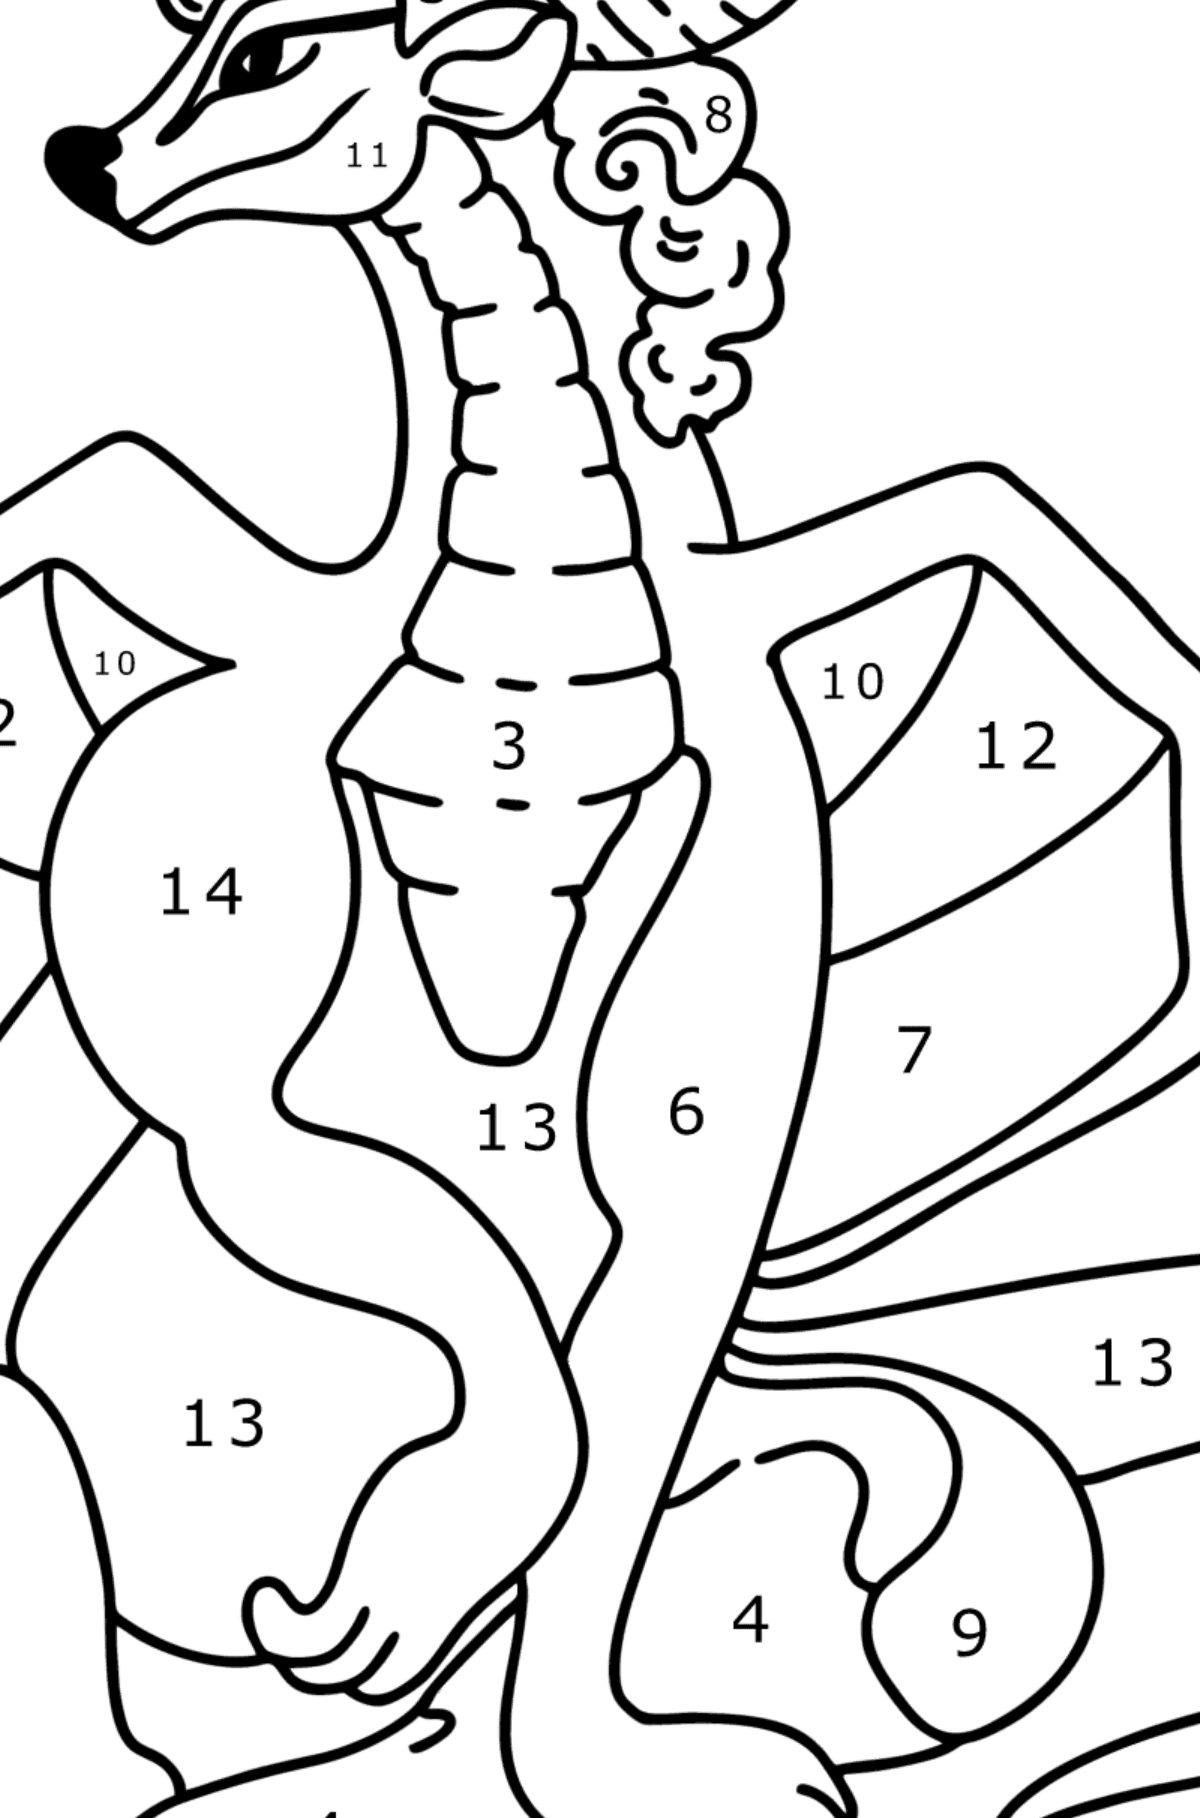 Happy Dragon coloring page - Coloring by Numbers for Kids